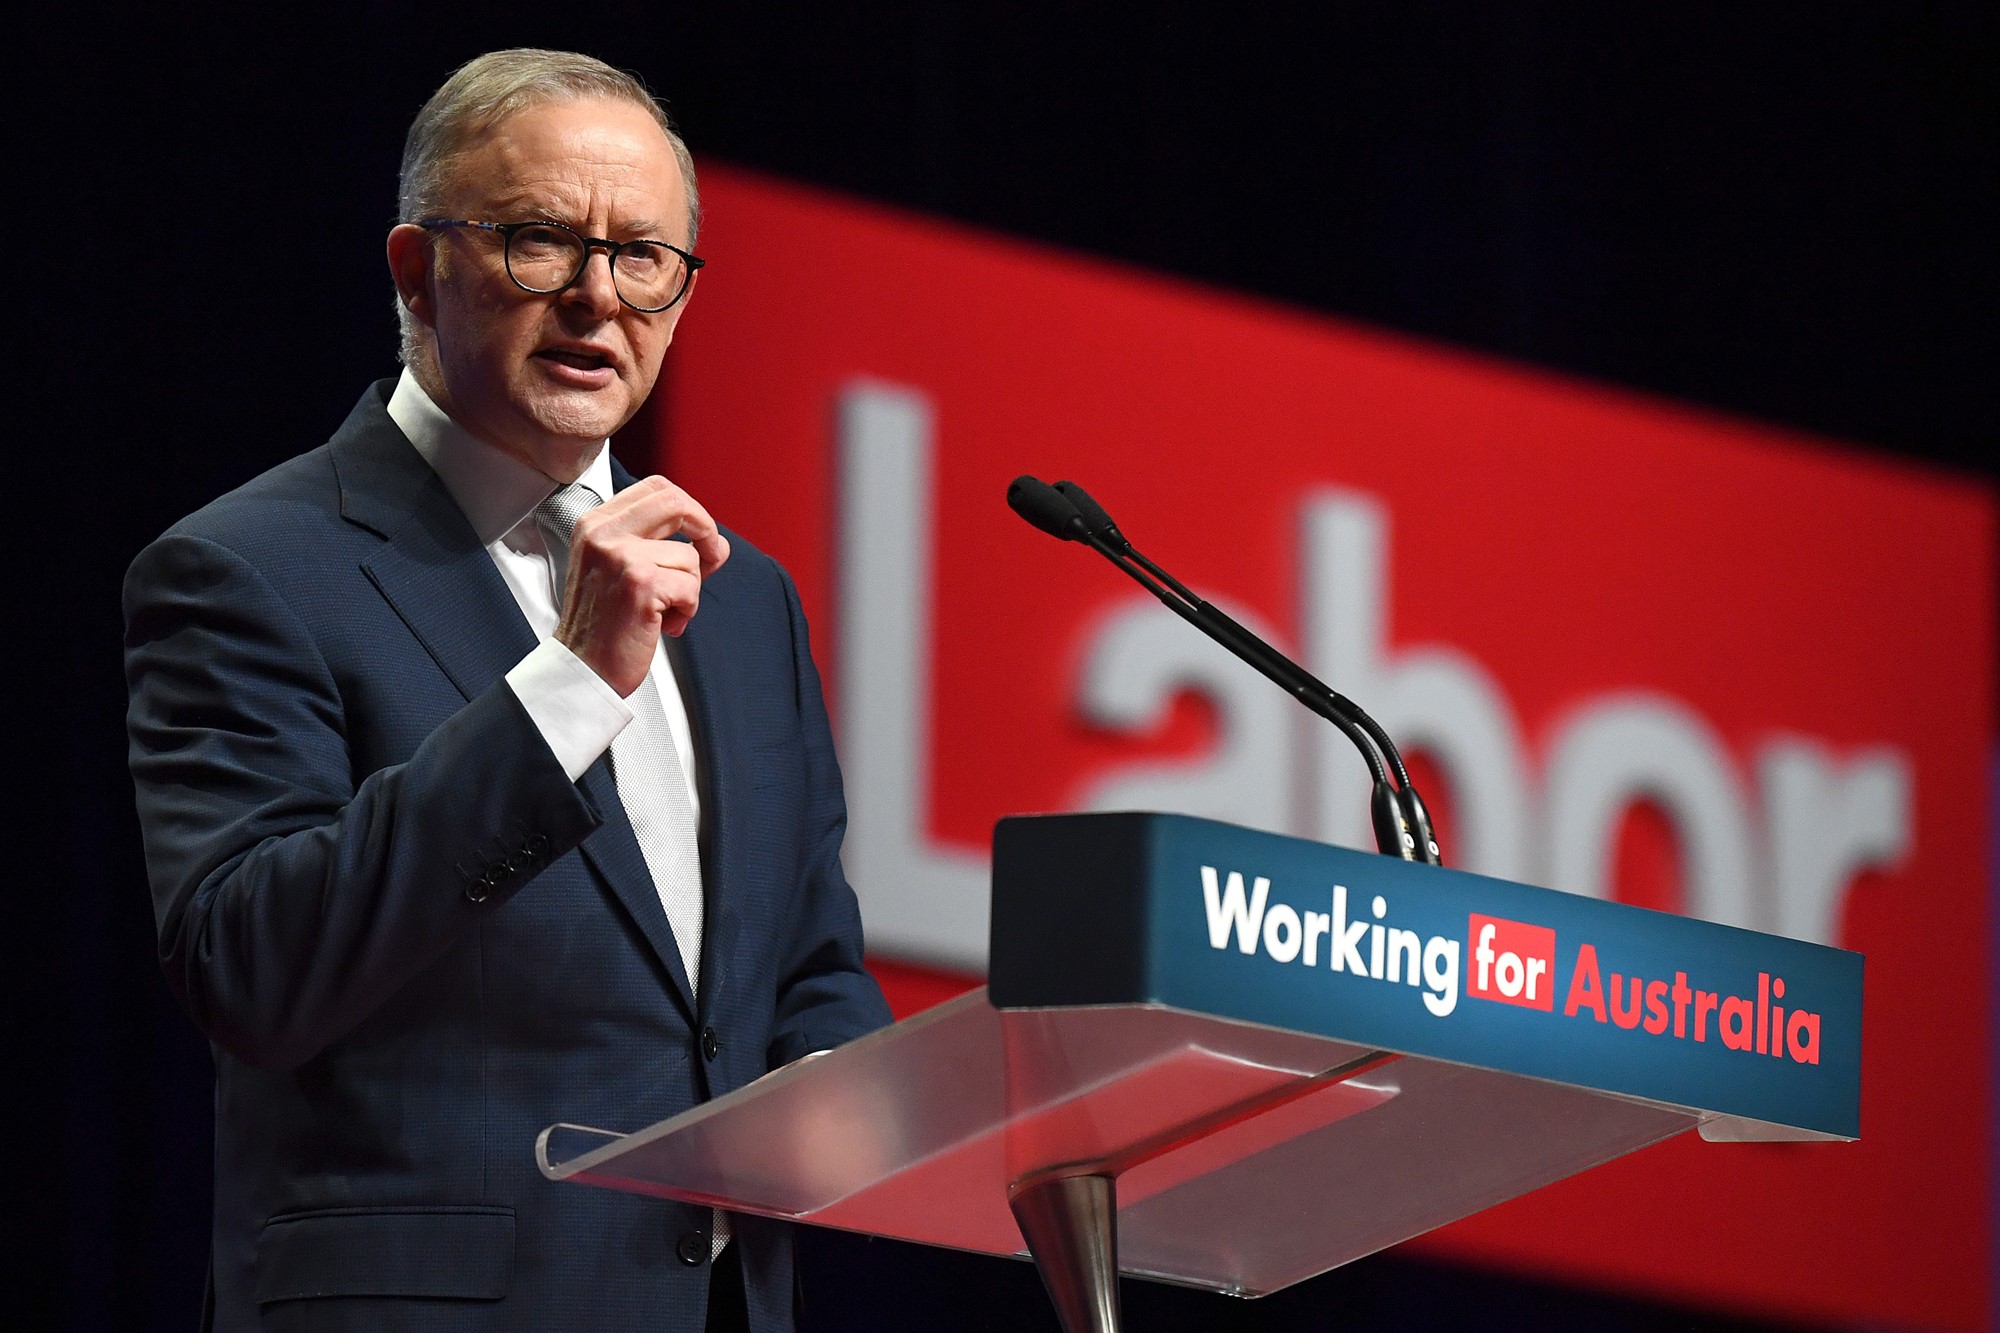 A man wearing glasses and a suit stands behind a lectern labelled "Working for Australia".